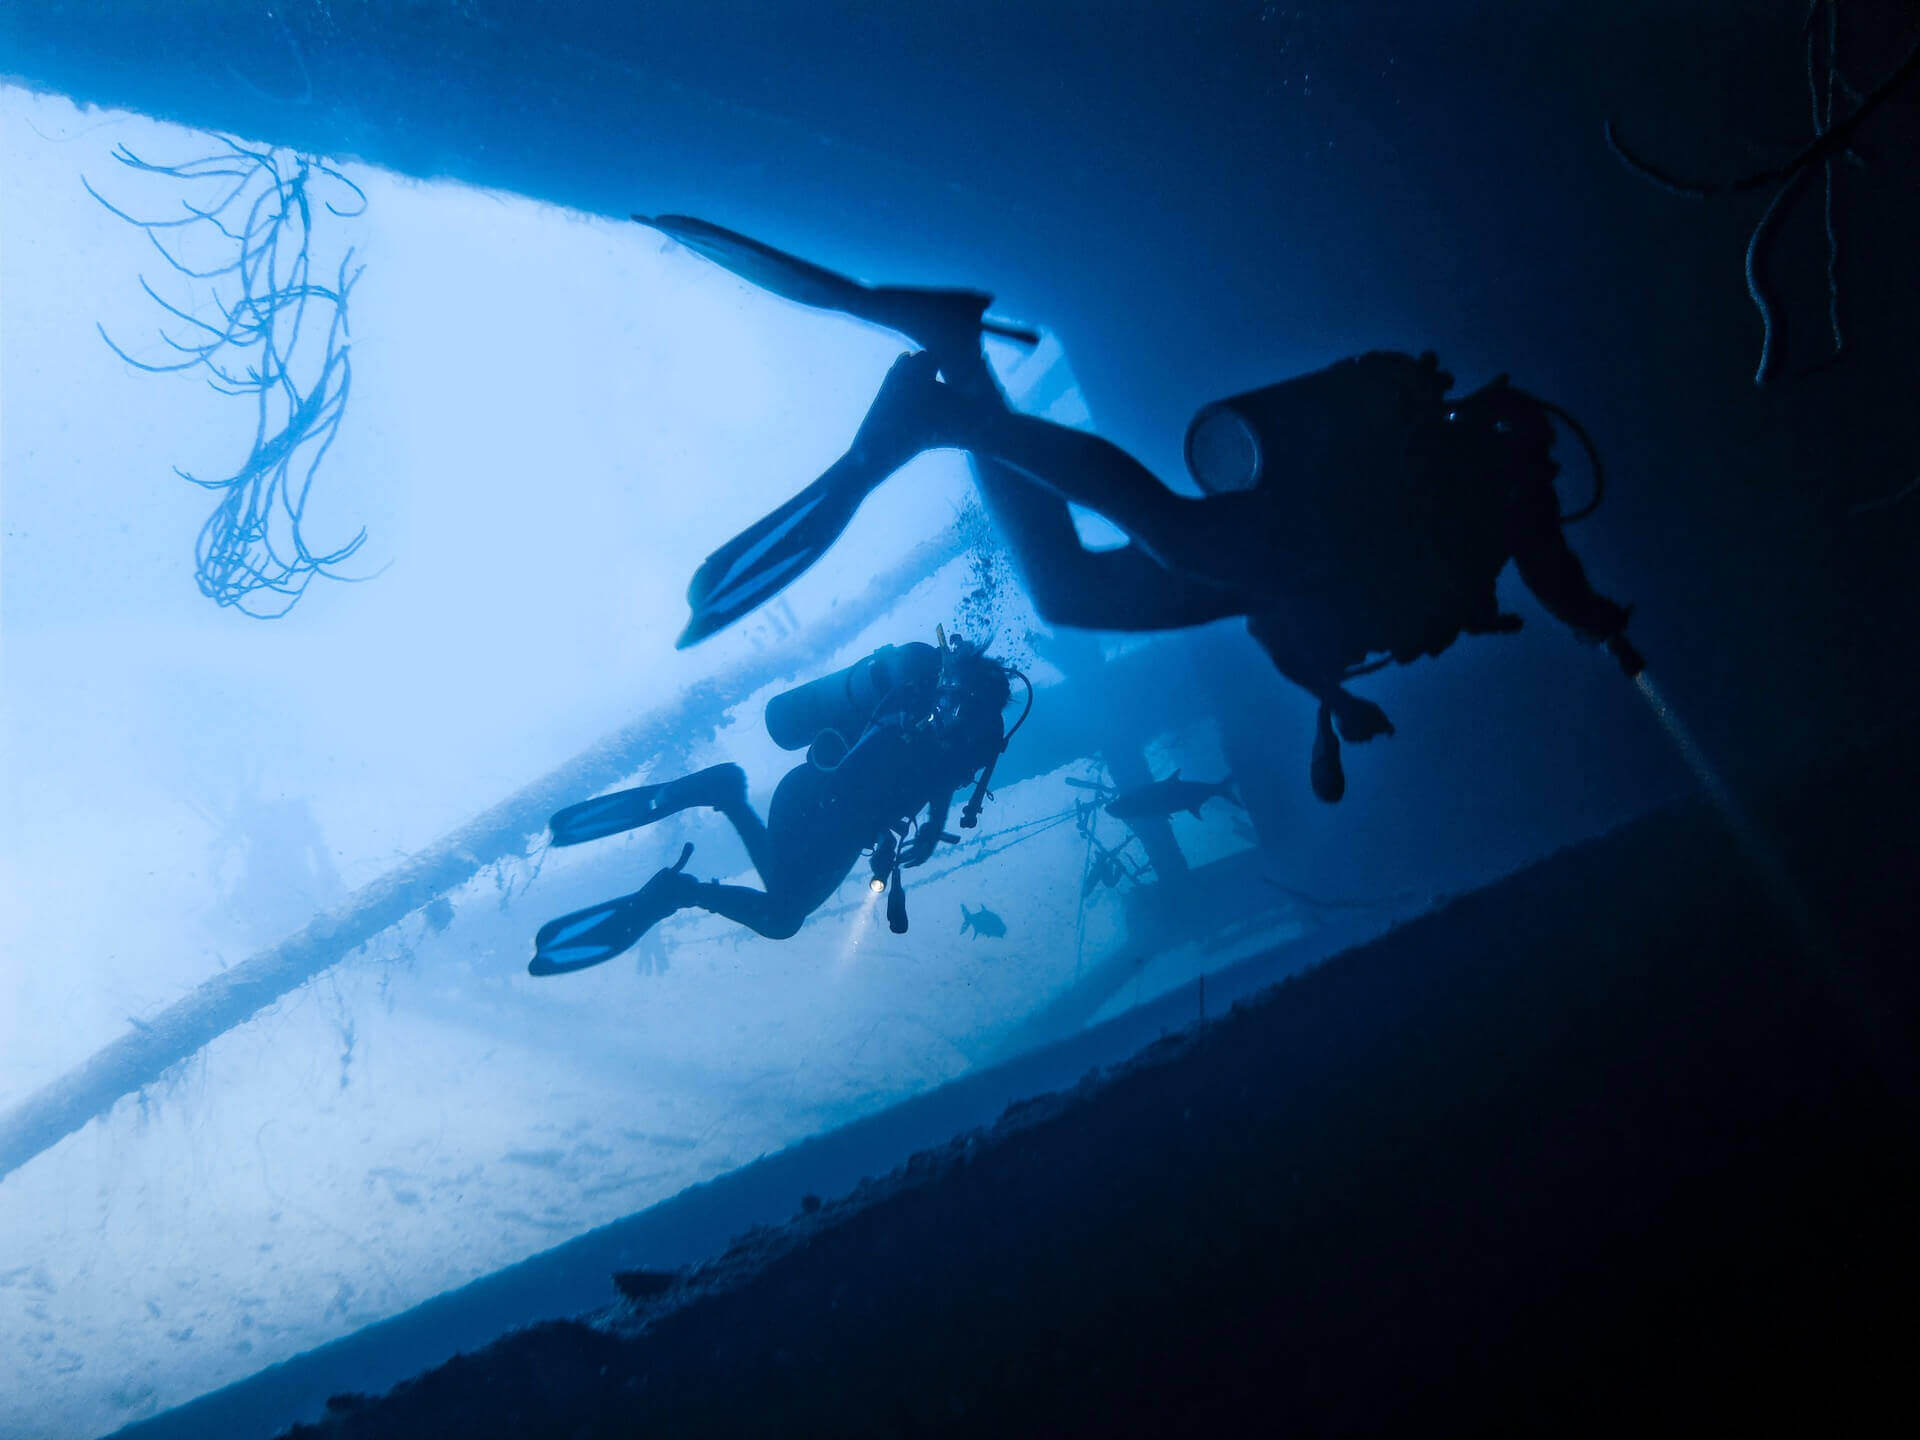 Divers exploring an underwater shipwreck